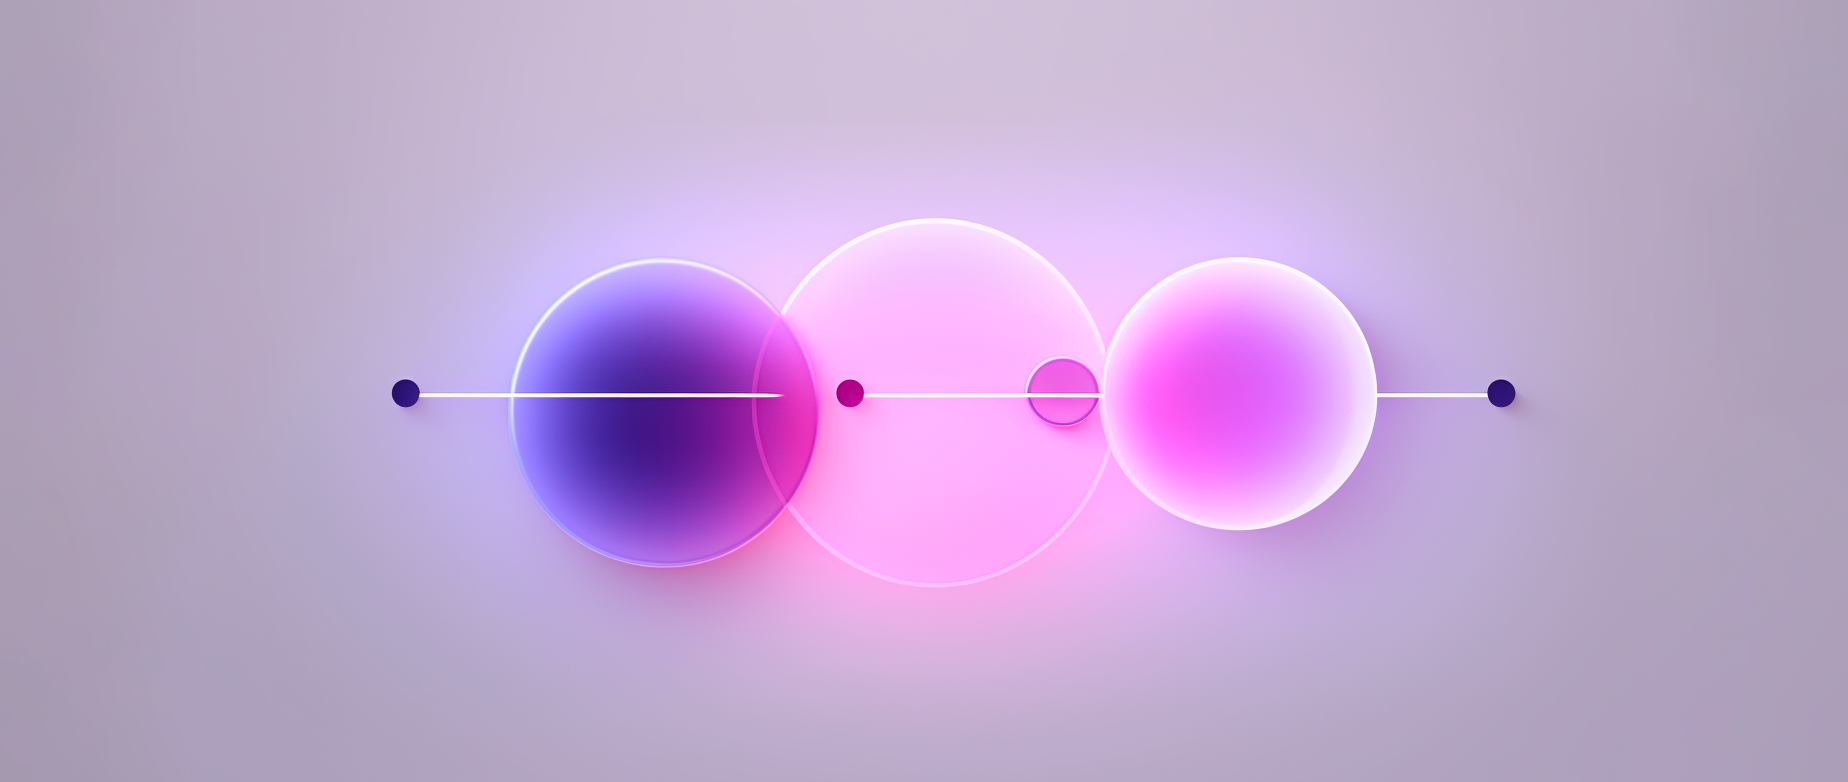 A design with purple and pink circles and a white line on a light purple background.